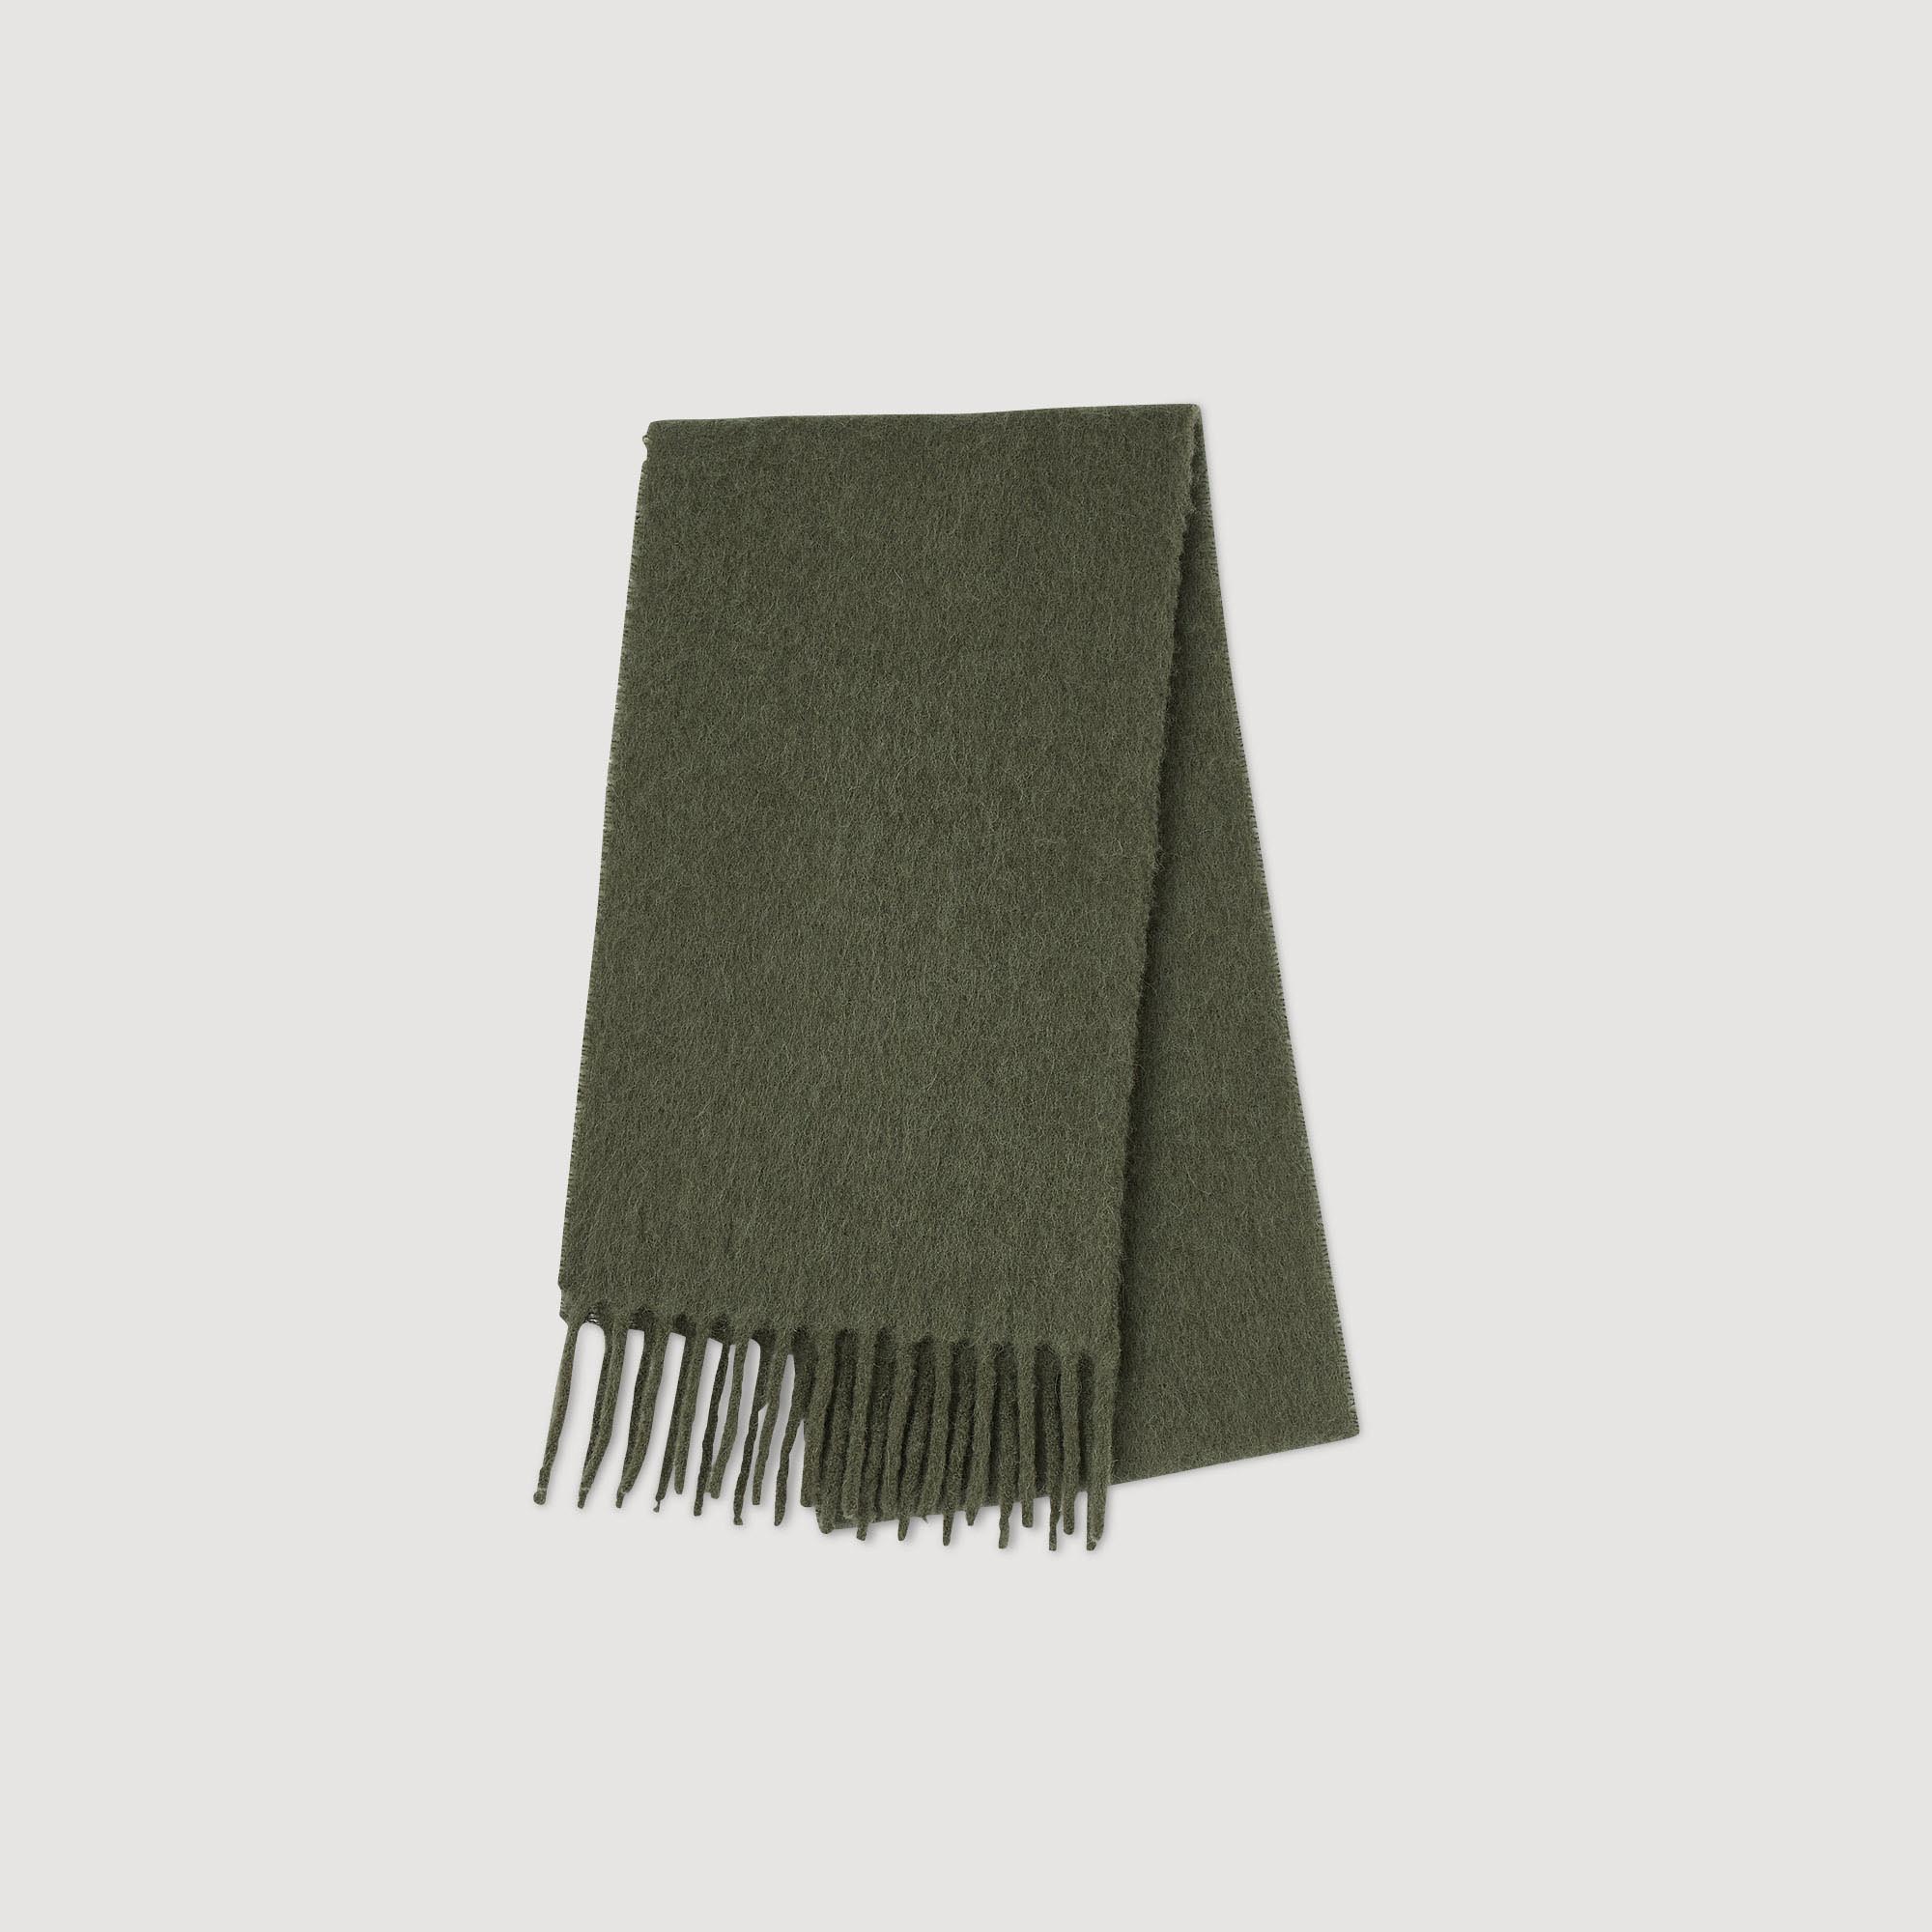 Sandro alpaca Woven and brushed alpaca blend scarf featuring a striped motif and a Sandro woven label